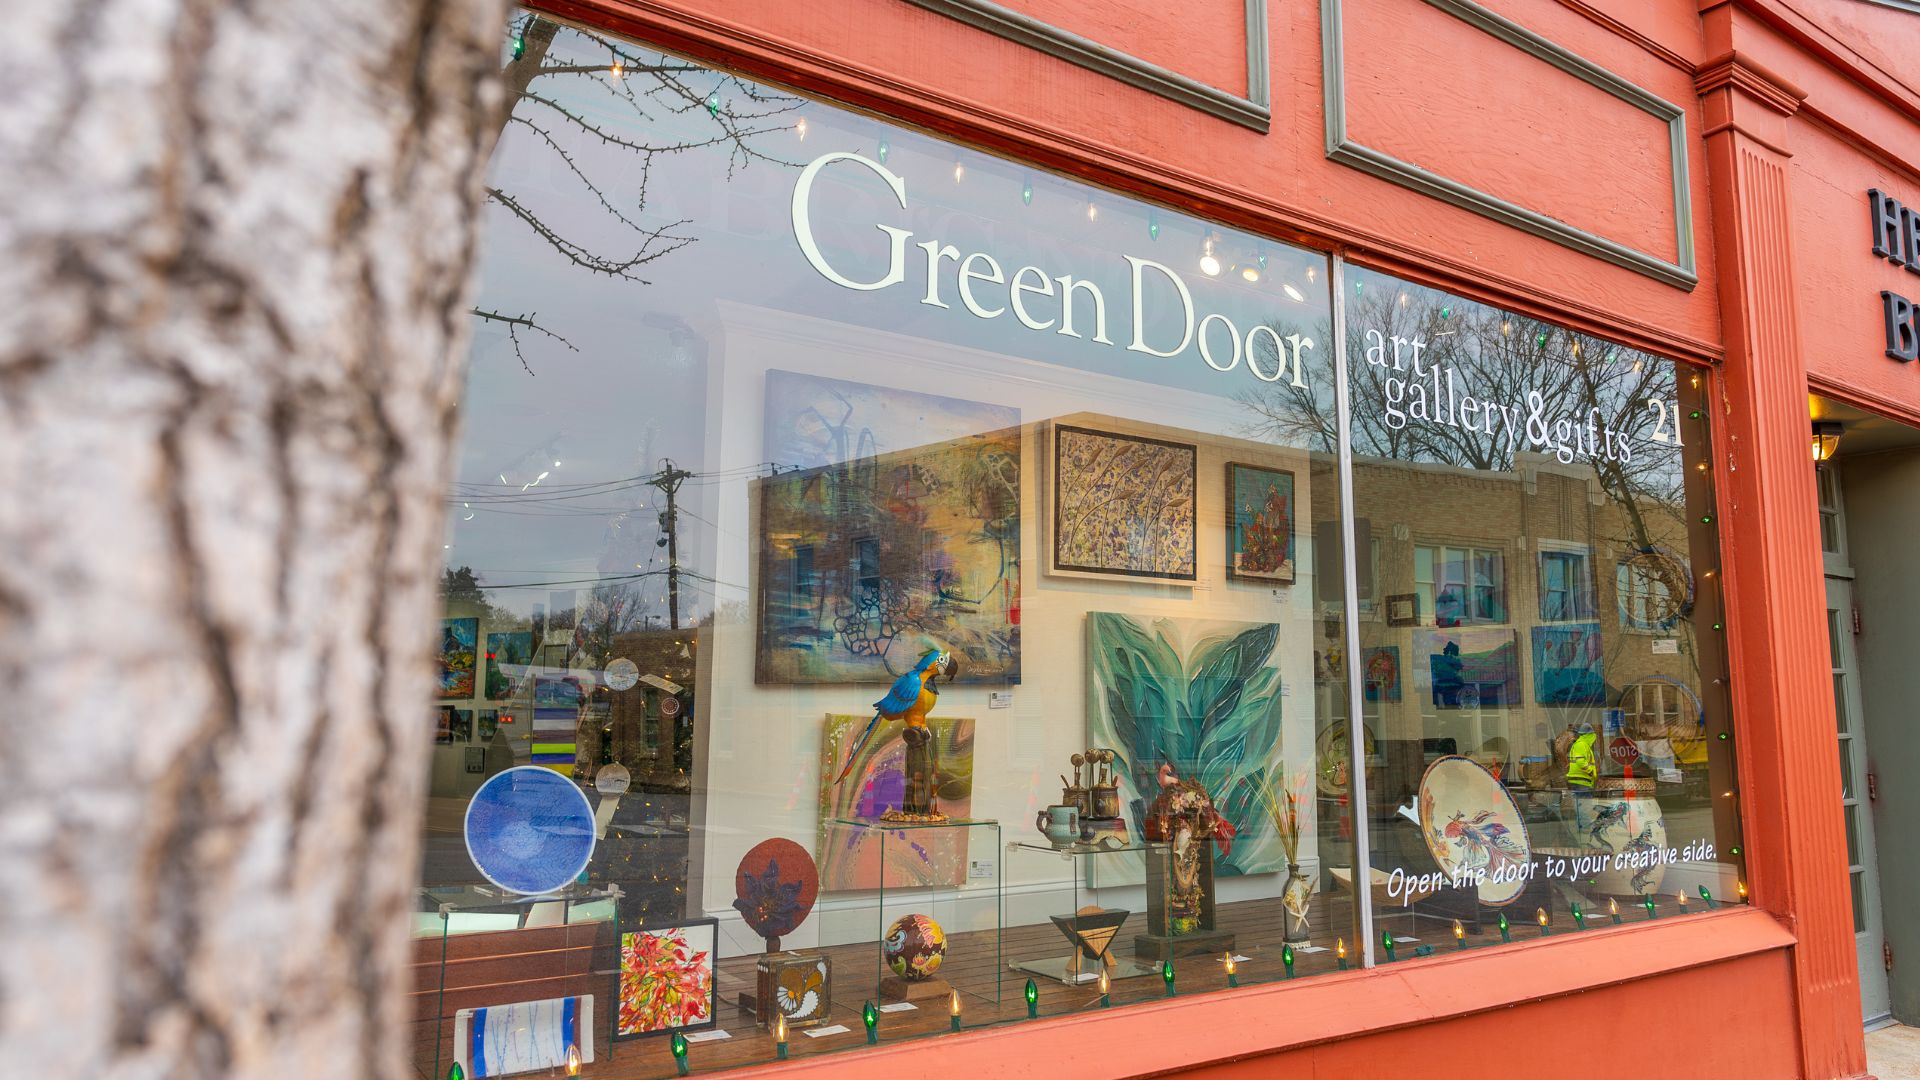 You can see art through the window of Green Door Art Gallery in St. Louis.